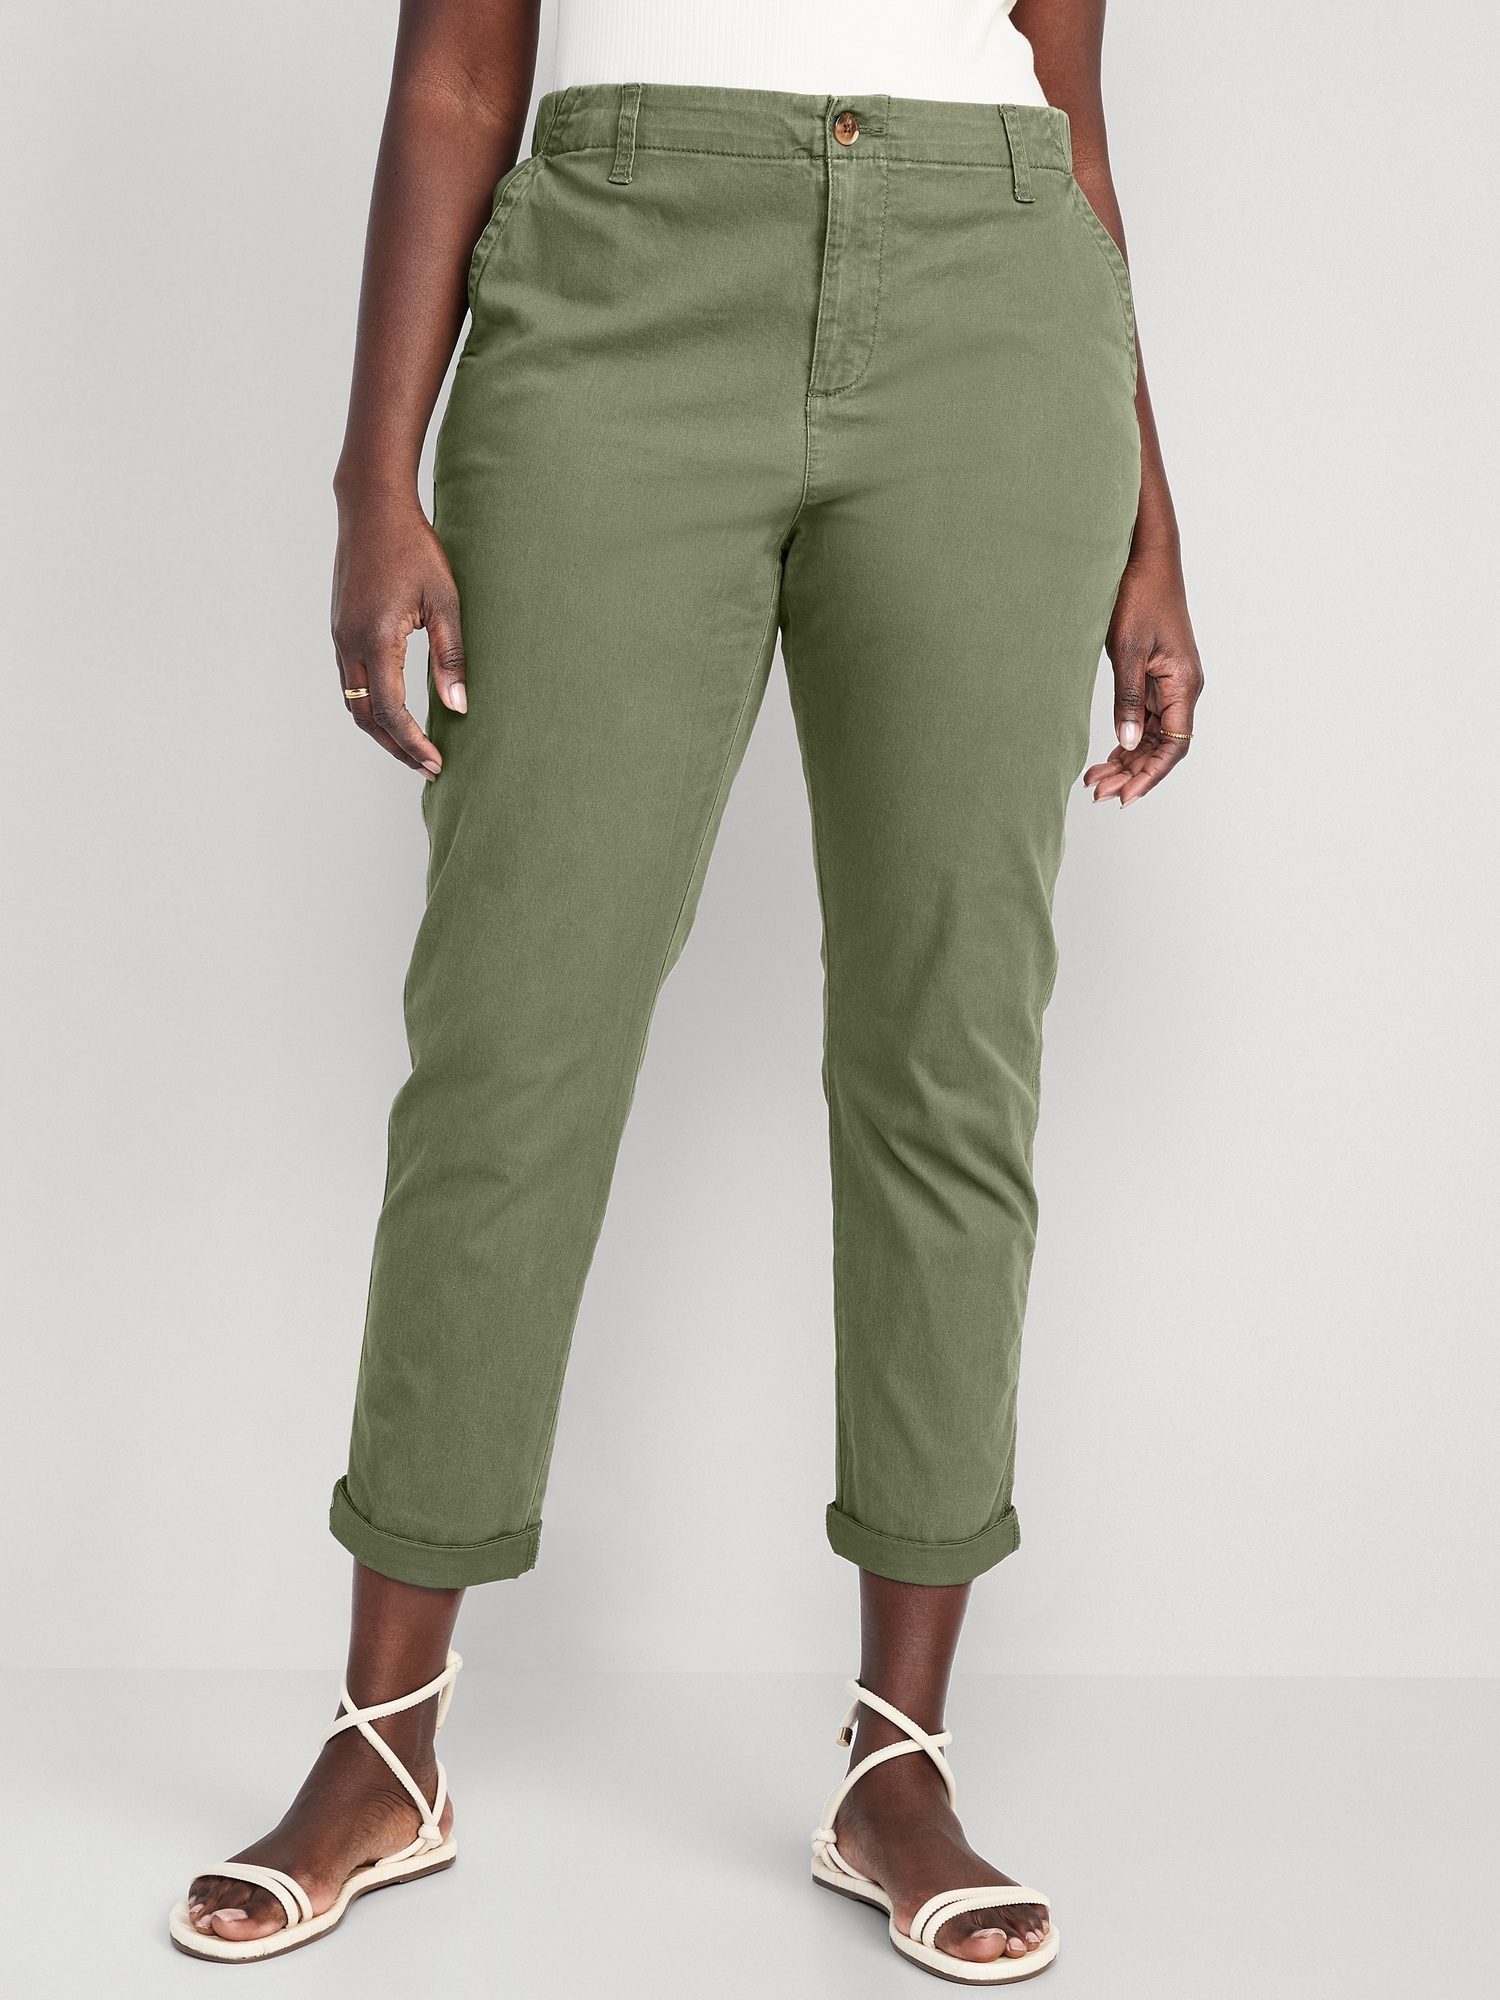 Women's High-rise Tapered Ankle Chino Pants - A New Day™ : Target